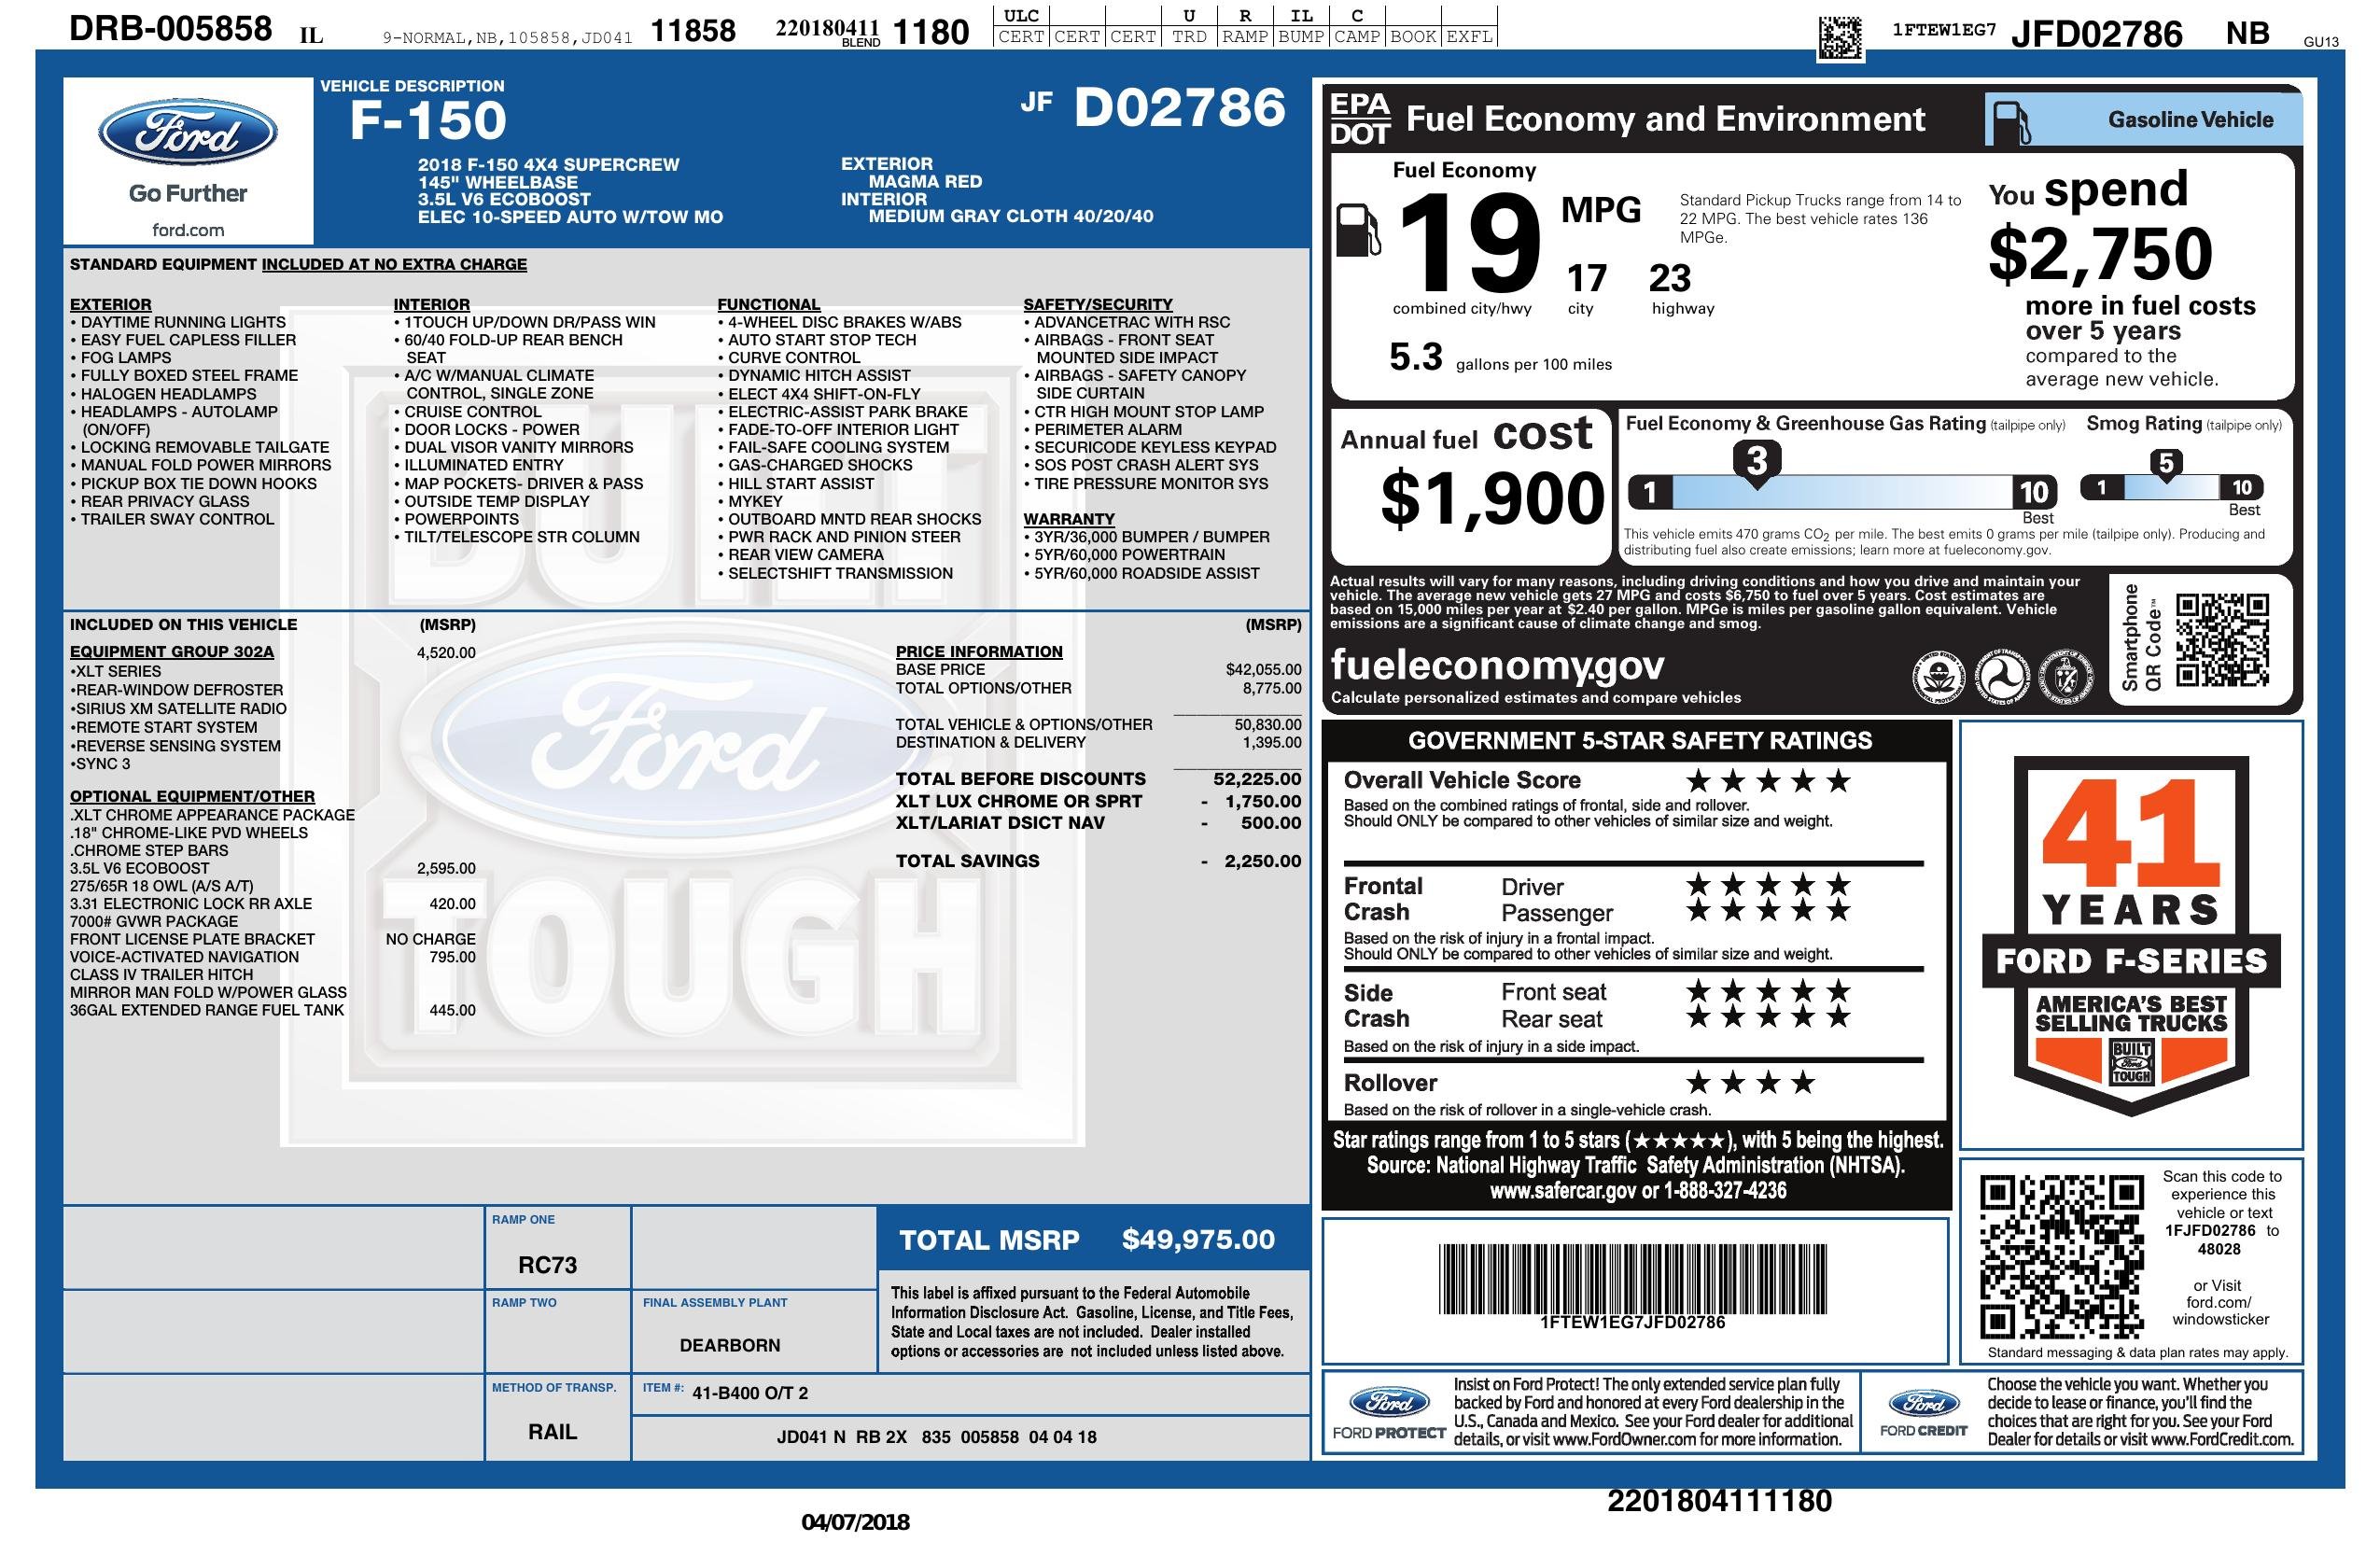 The Ultimate Guide To Ford Window Sticker